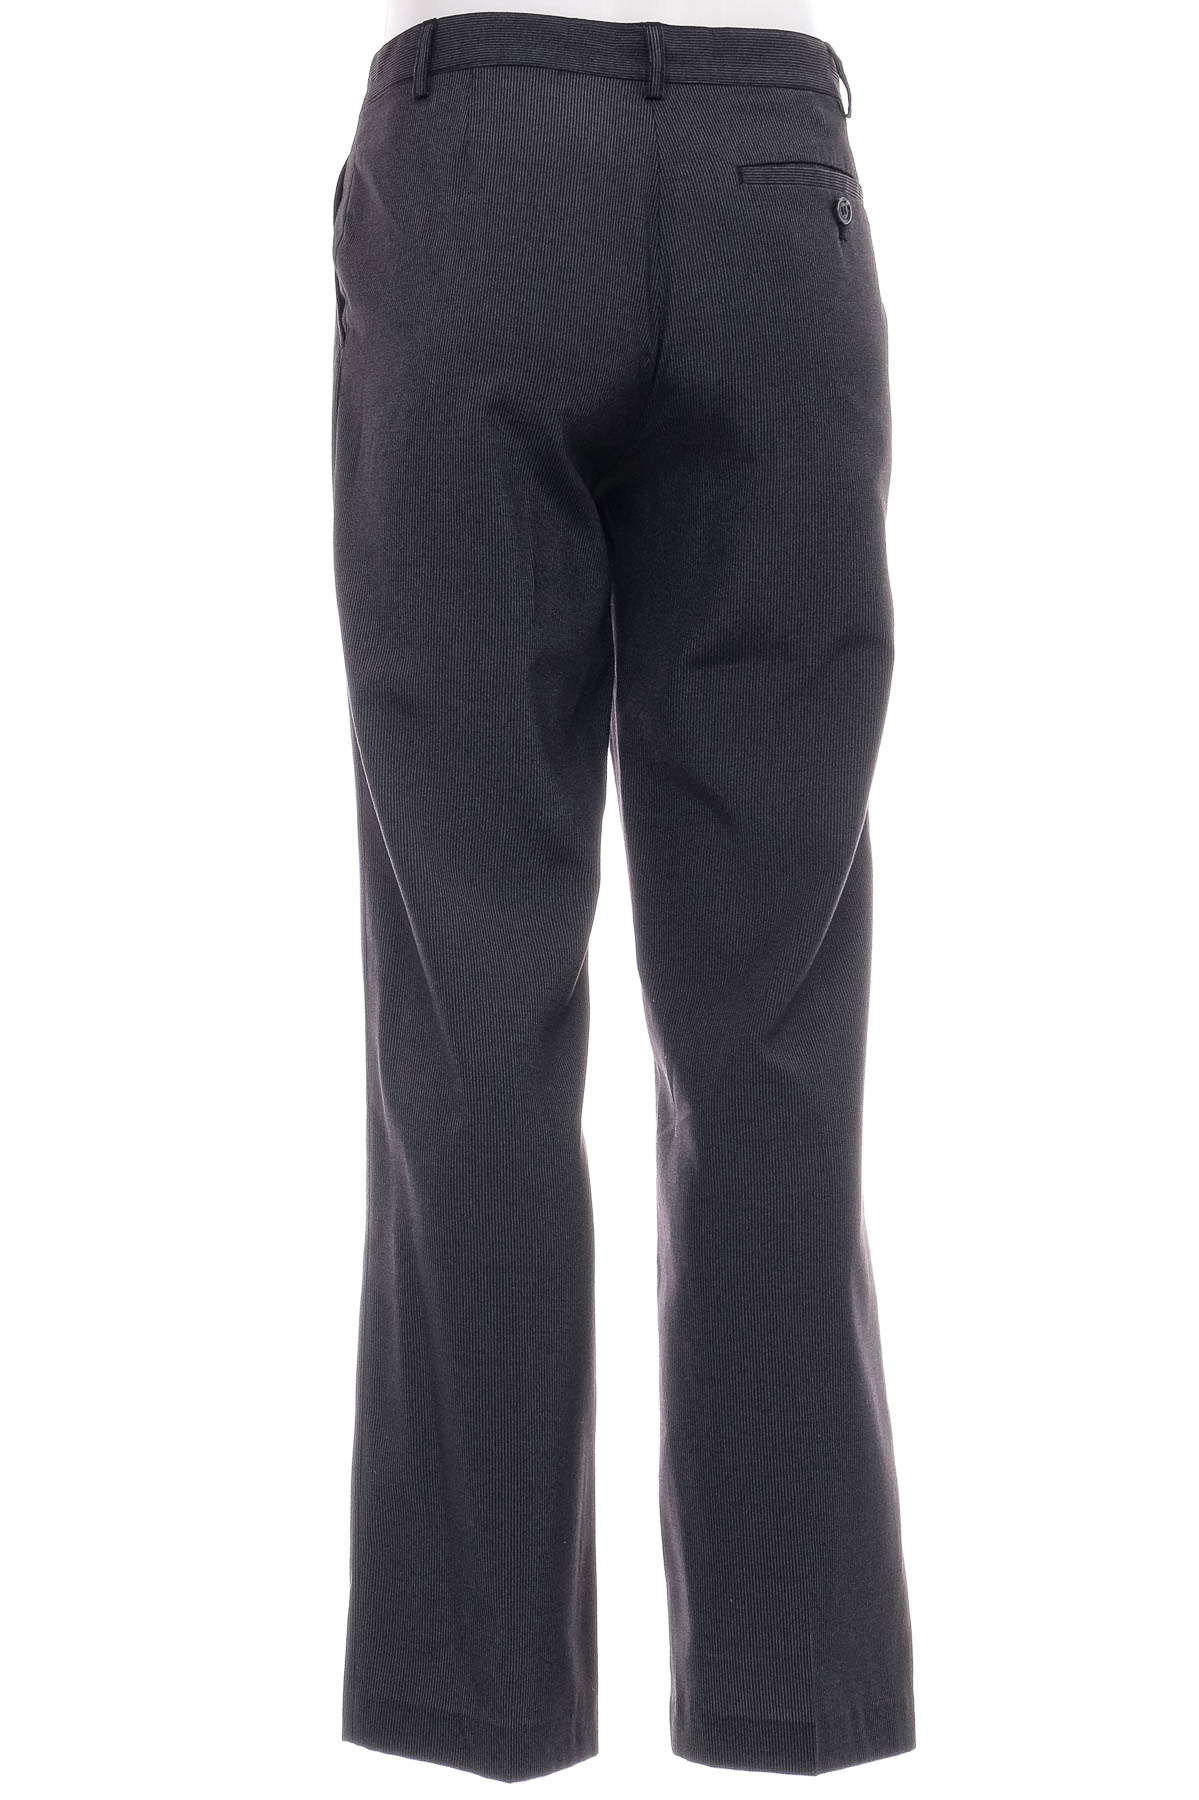 Trousers for boy - Gatonegro - 1